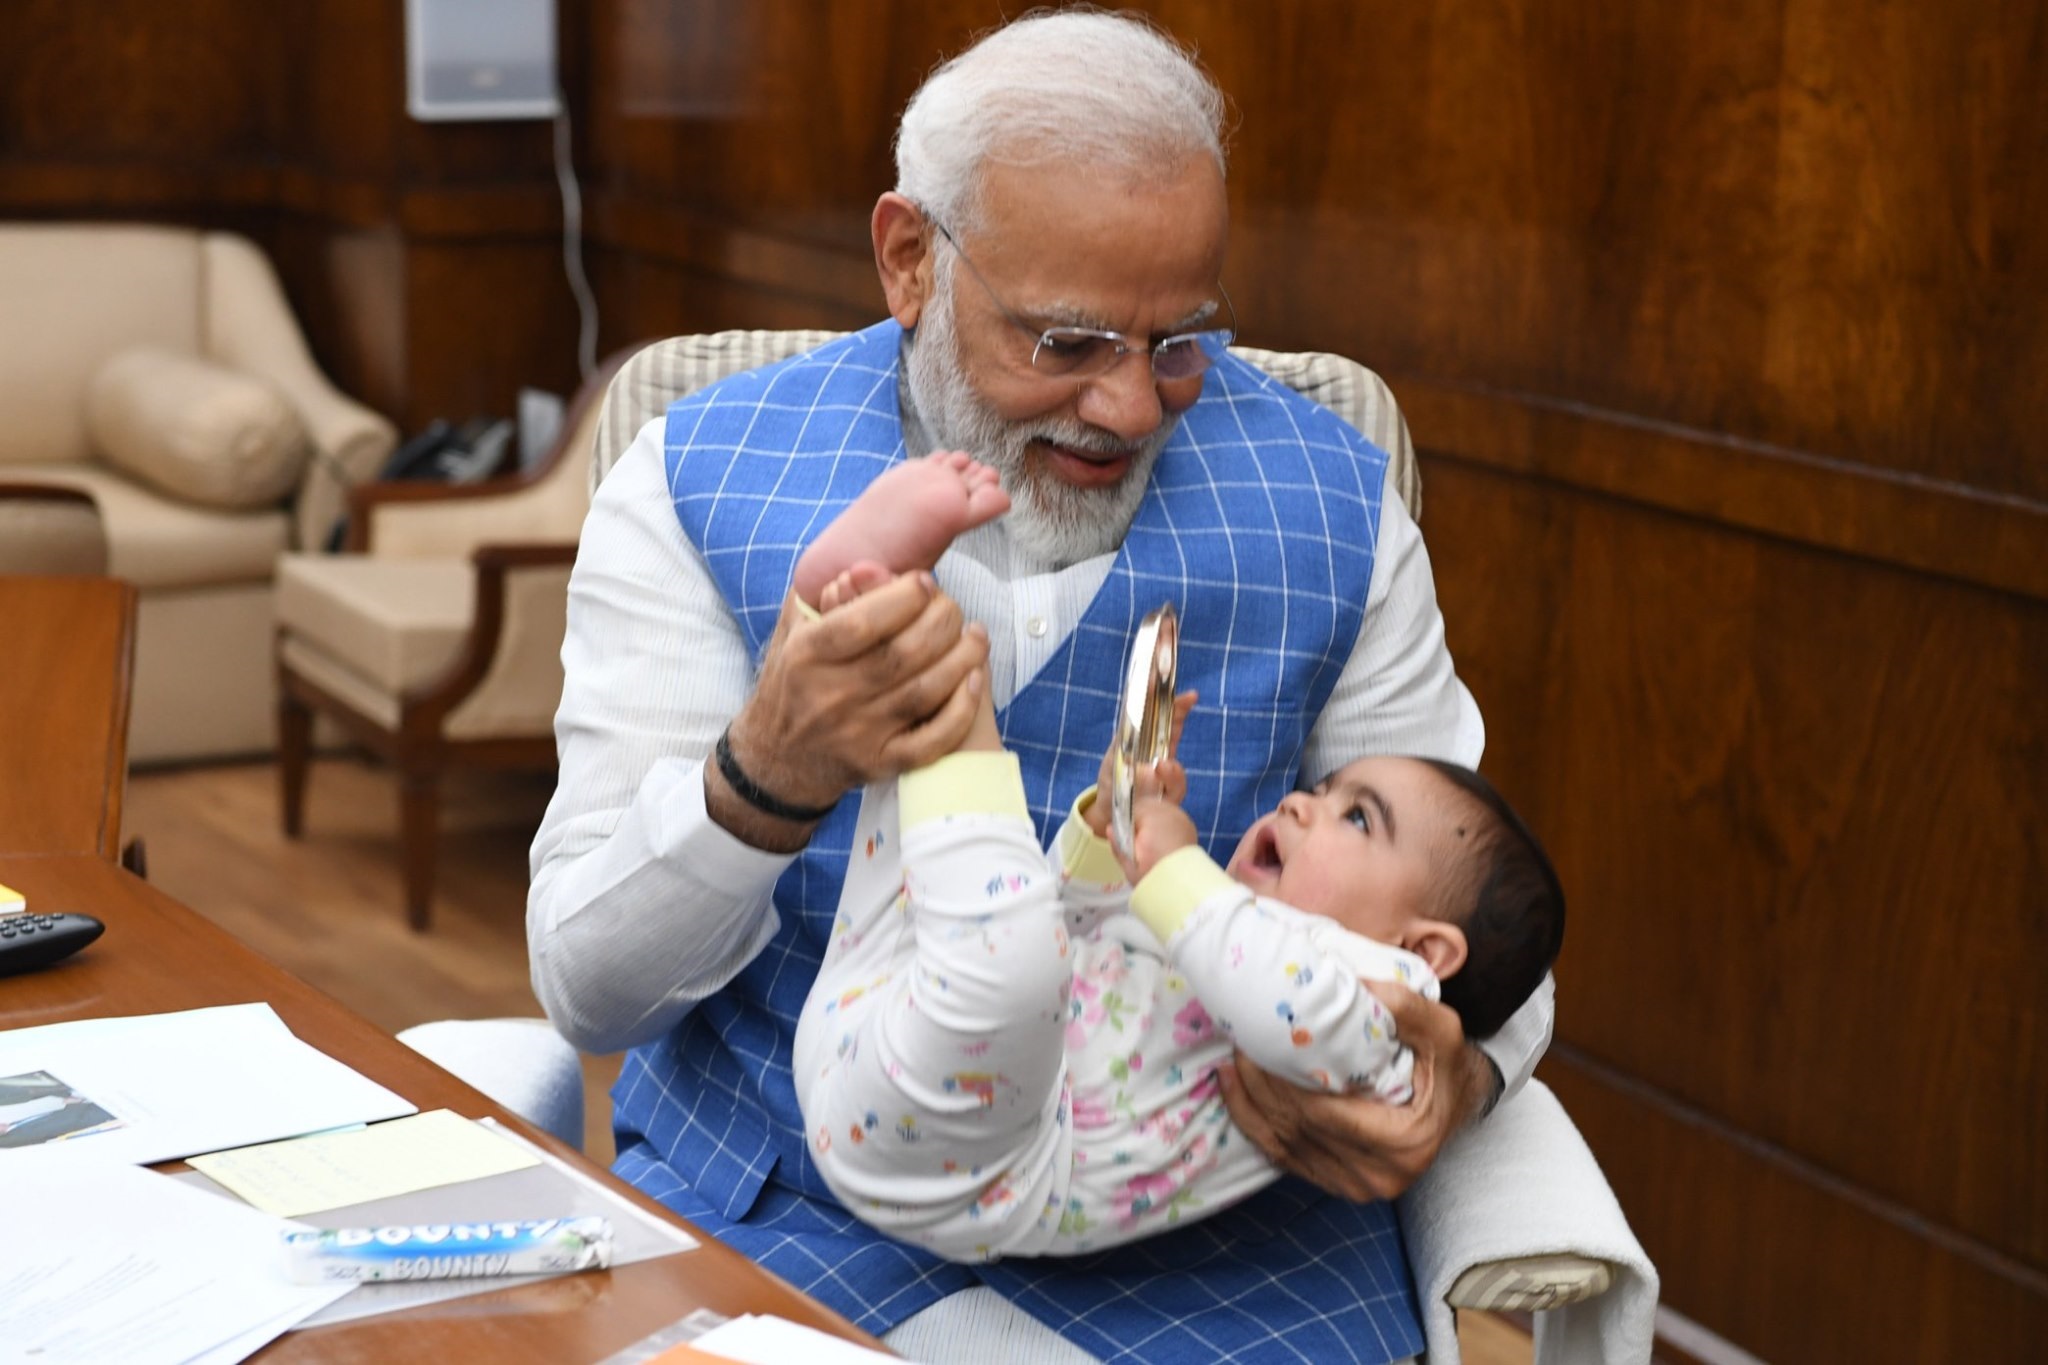 PM Modi Playing With A Baby At His Office